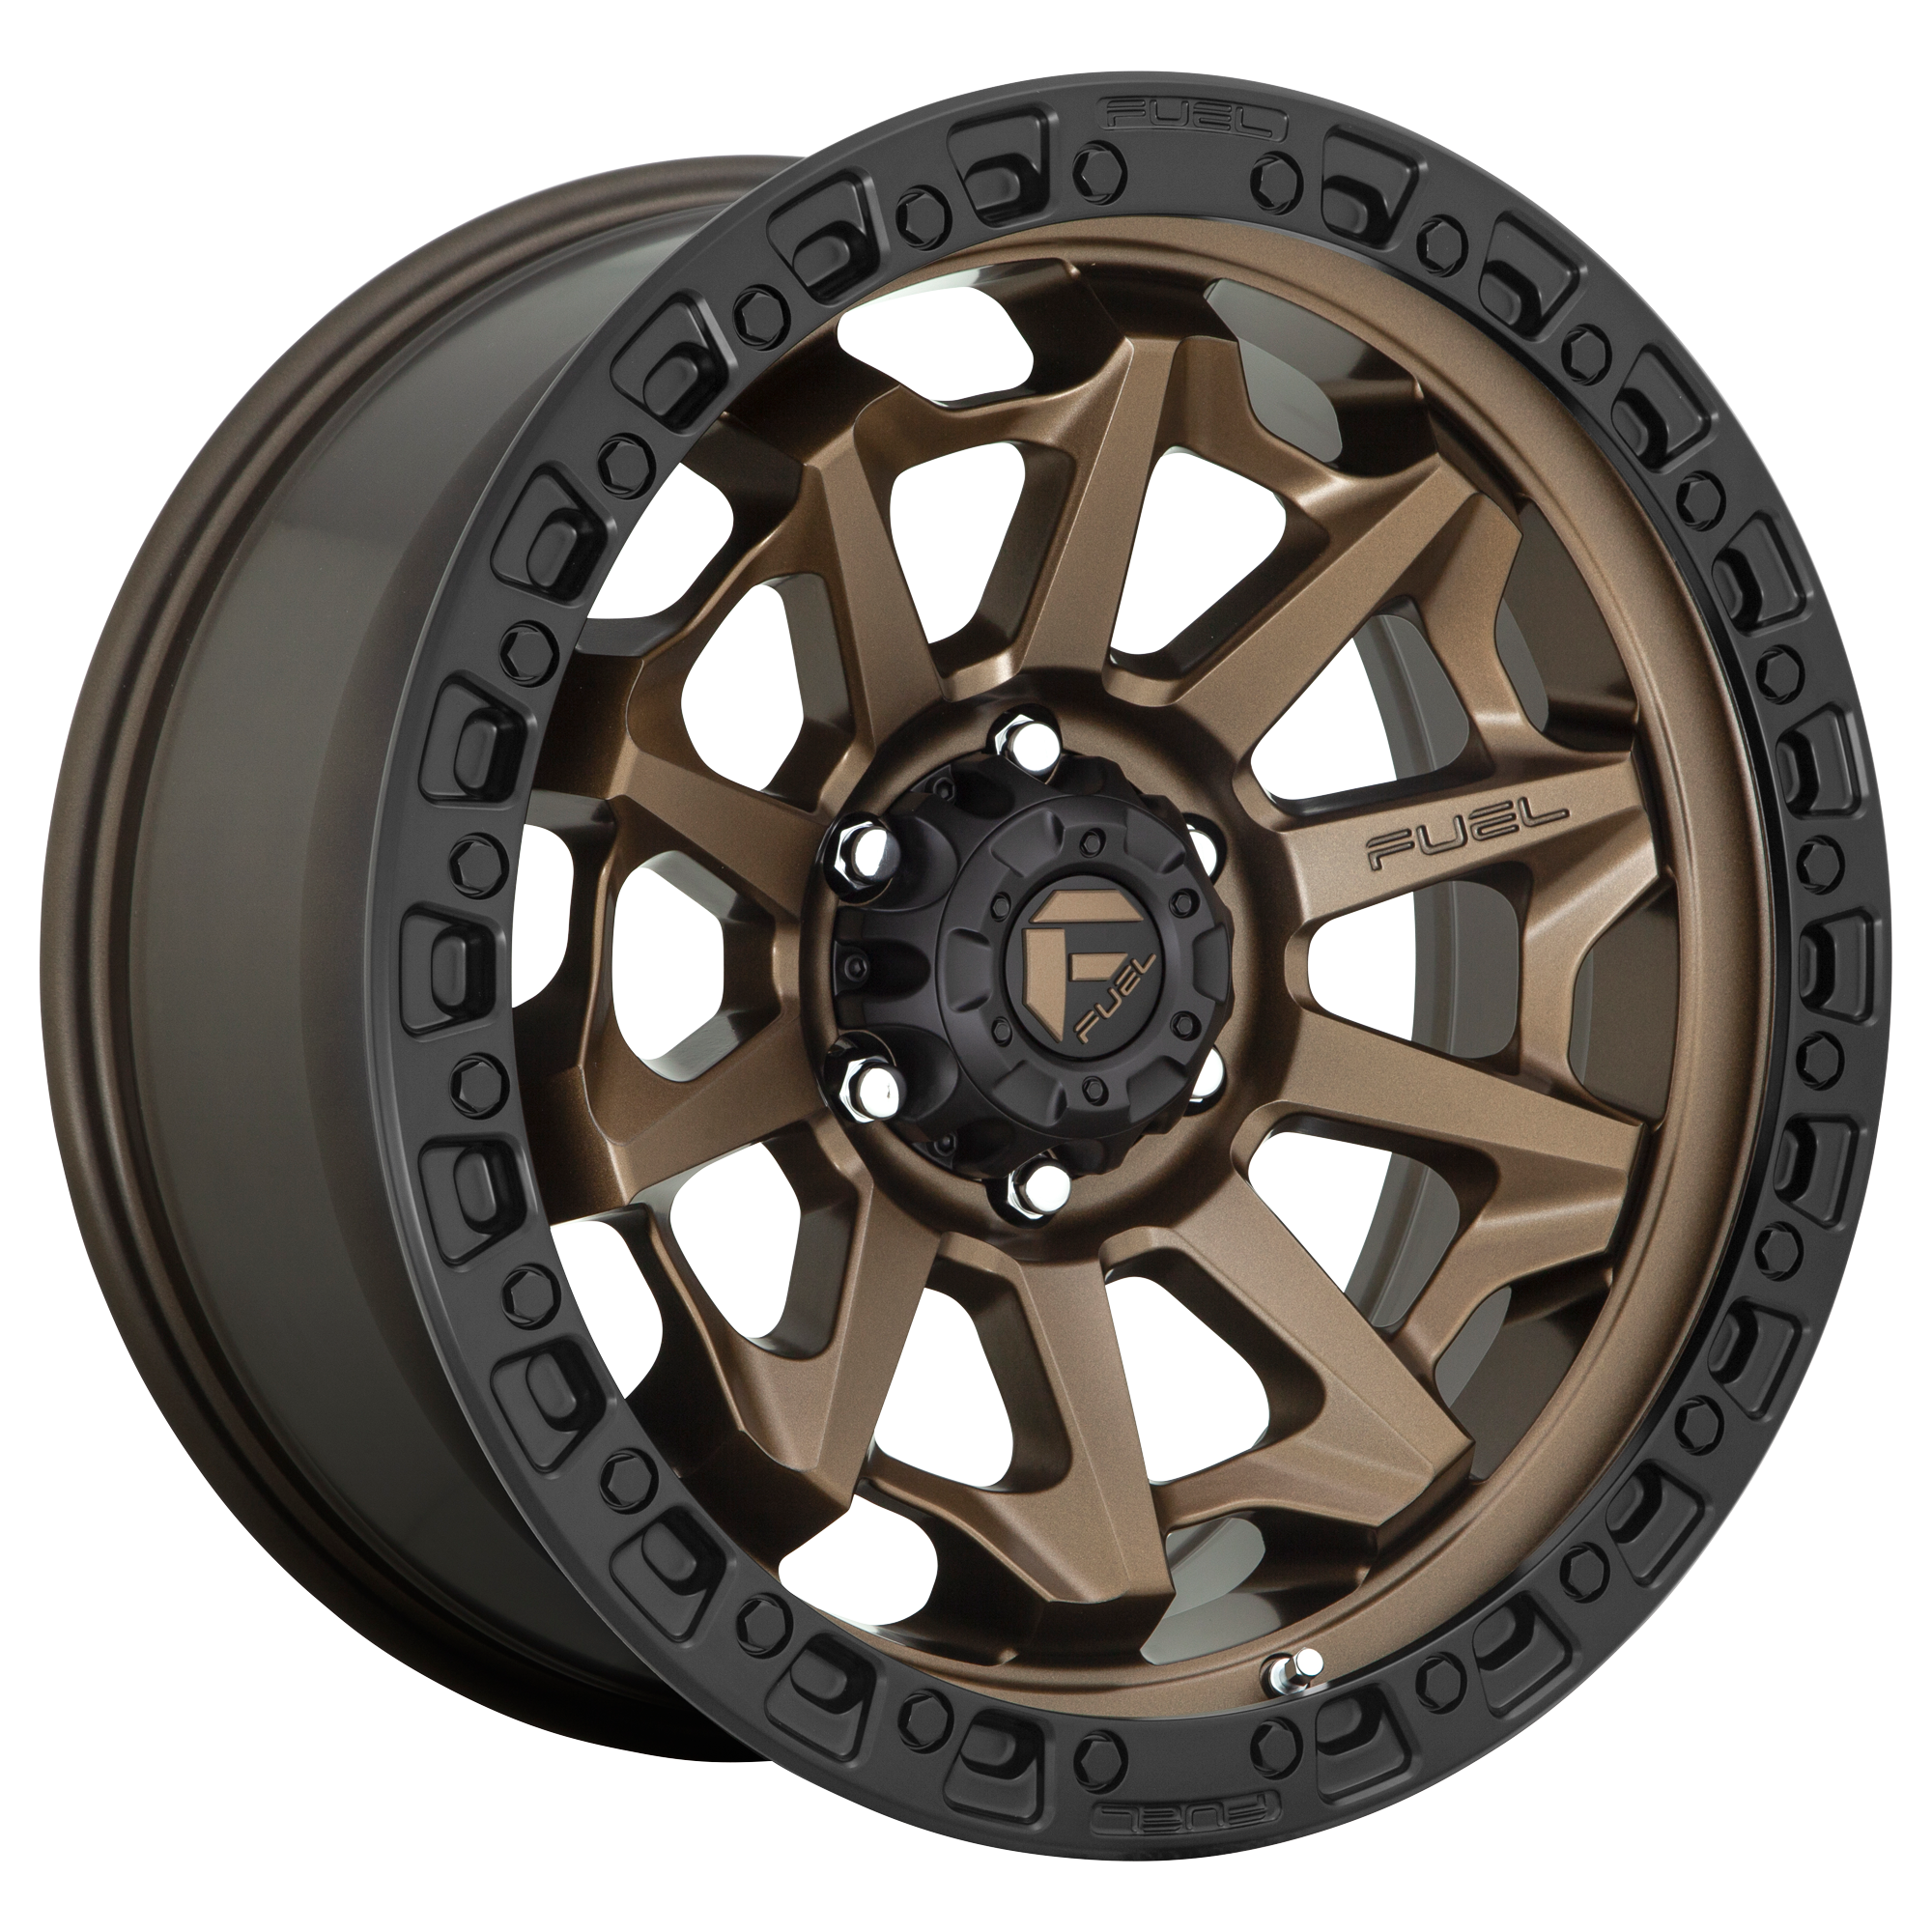 COVERT 20x10 8x180.00 MATTE BRONZE BLACK BEAD RING (-18 mm) - Tires and Engine Performance